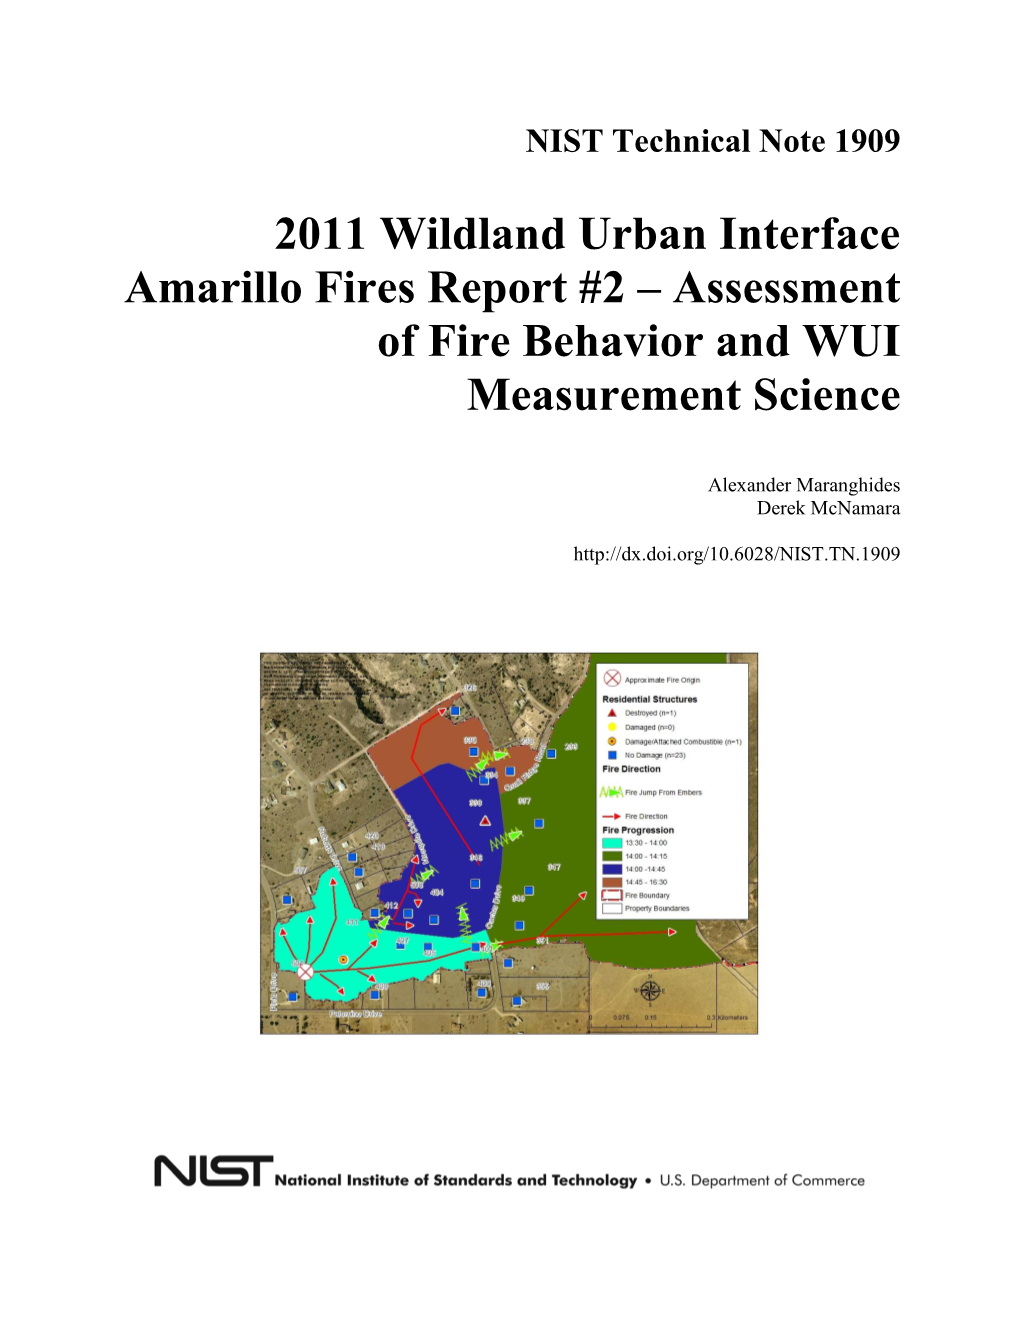 2011 Wildland Urban Interface Amarillo Fires Report #2 – Assessment of Fire Behavior and WUI Measurement Science